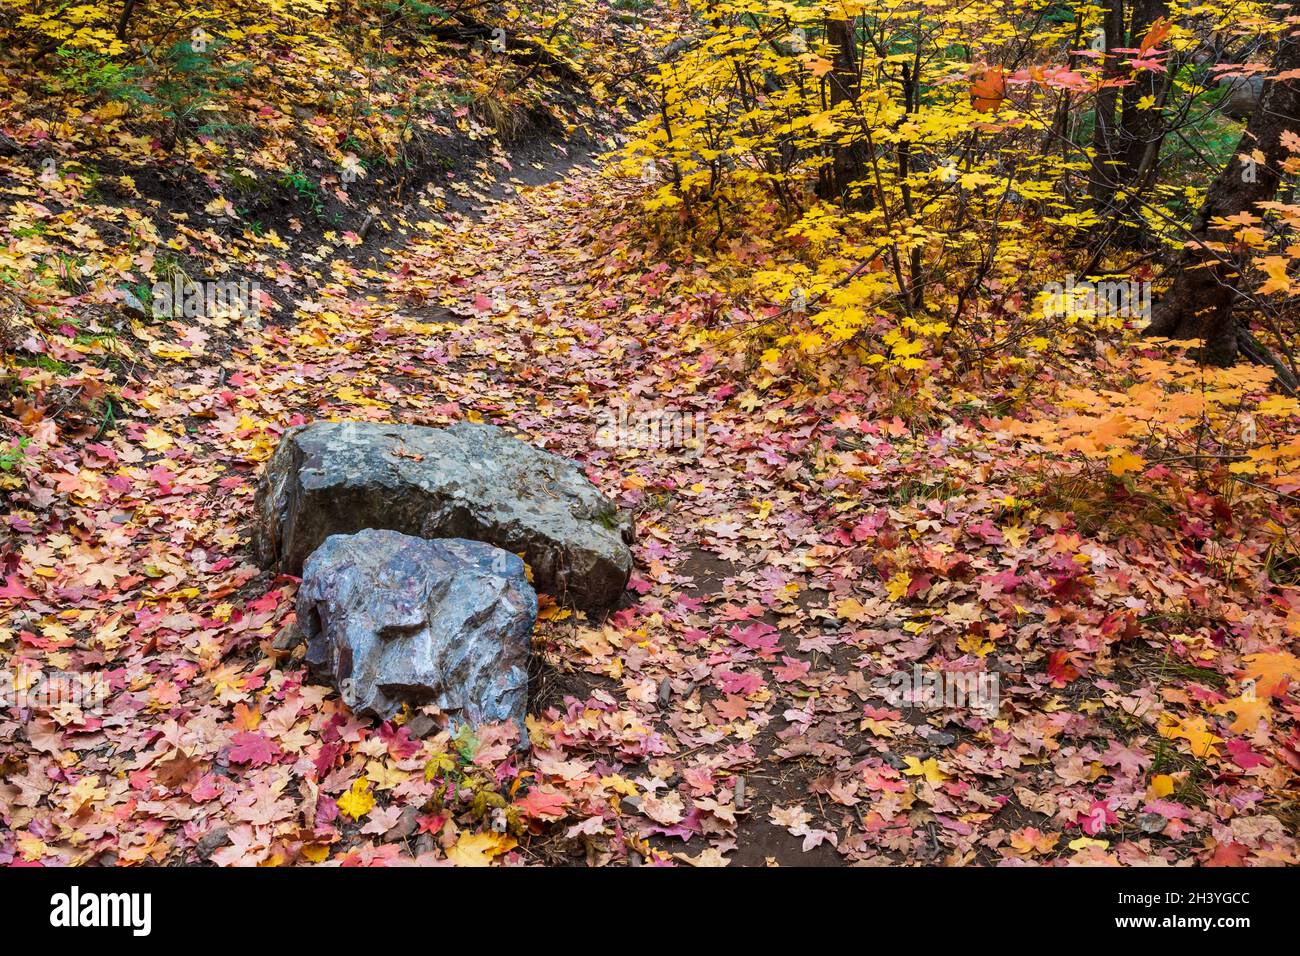 Colorful fall leaves cover a forest path Stock Photo